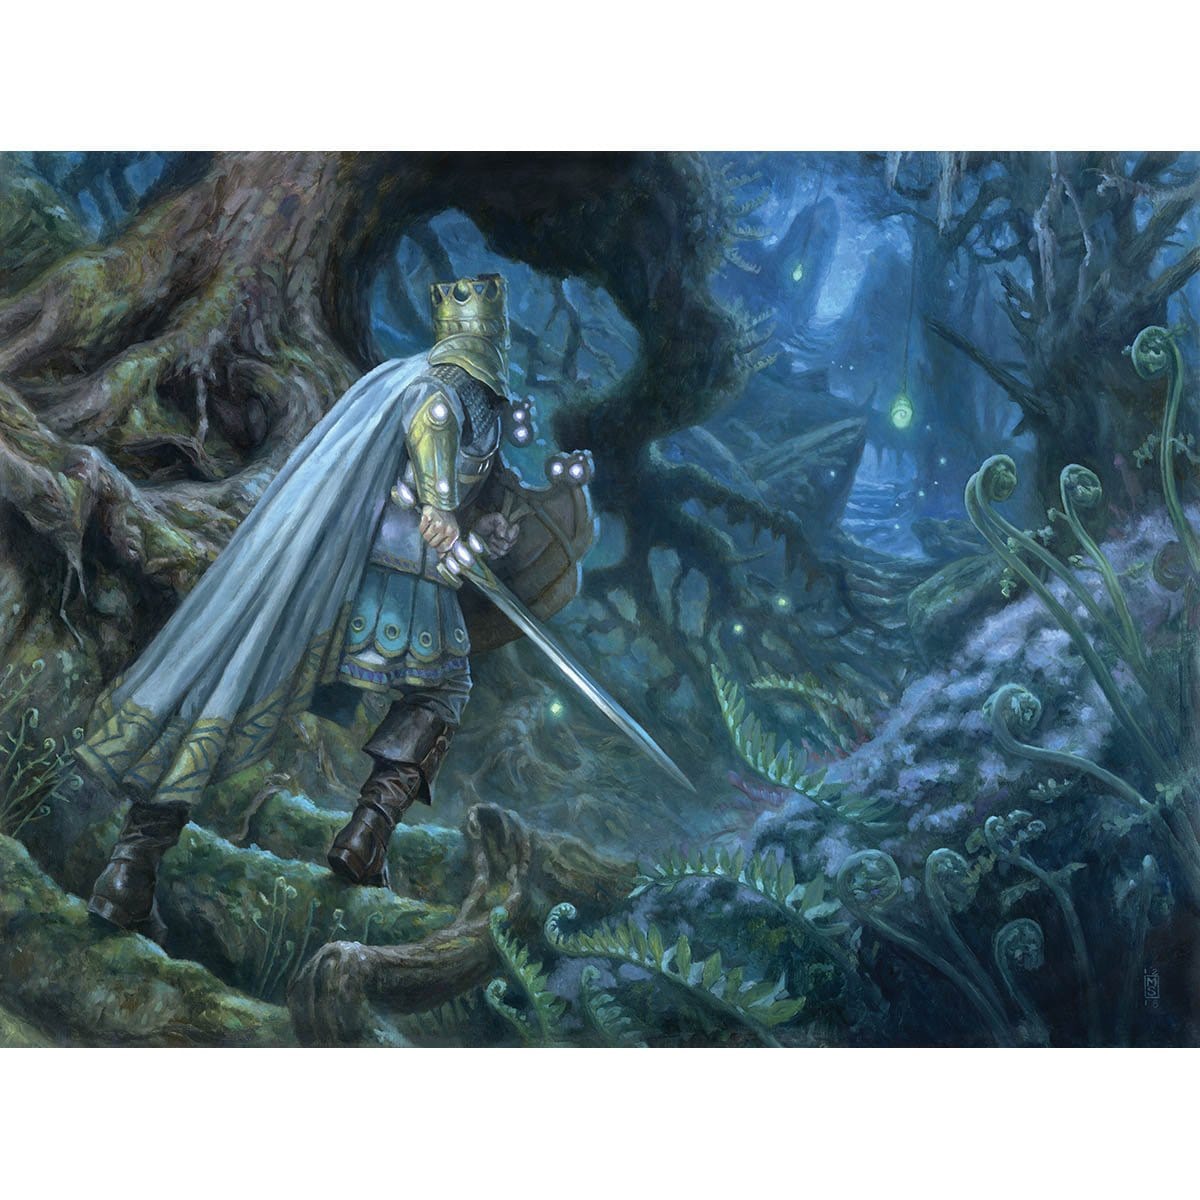 Once Upon a Time Print - Print - Original Magic Art - Accessories for Magic the Gathering and other card games